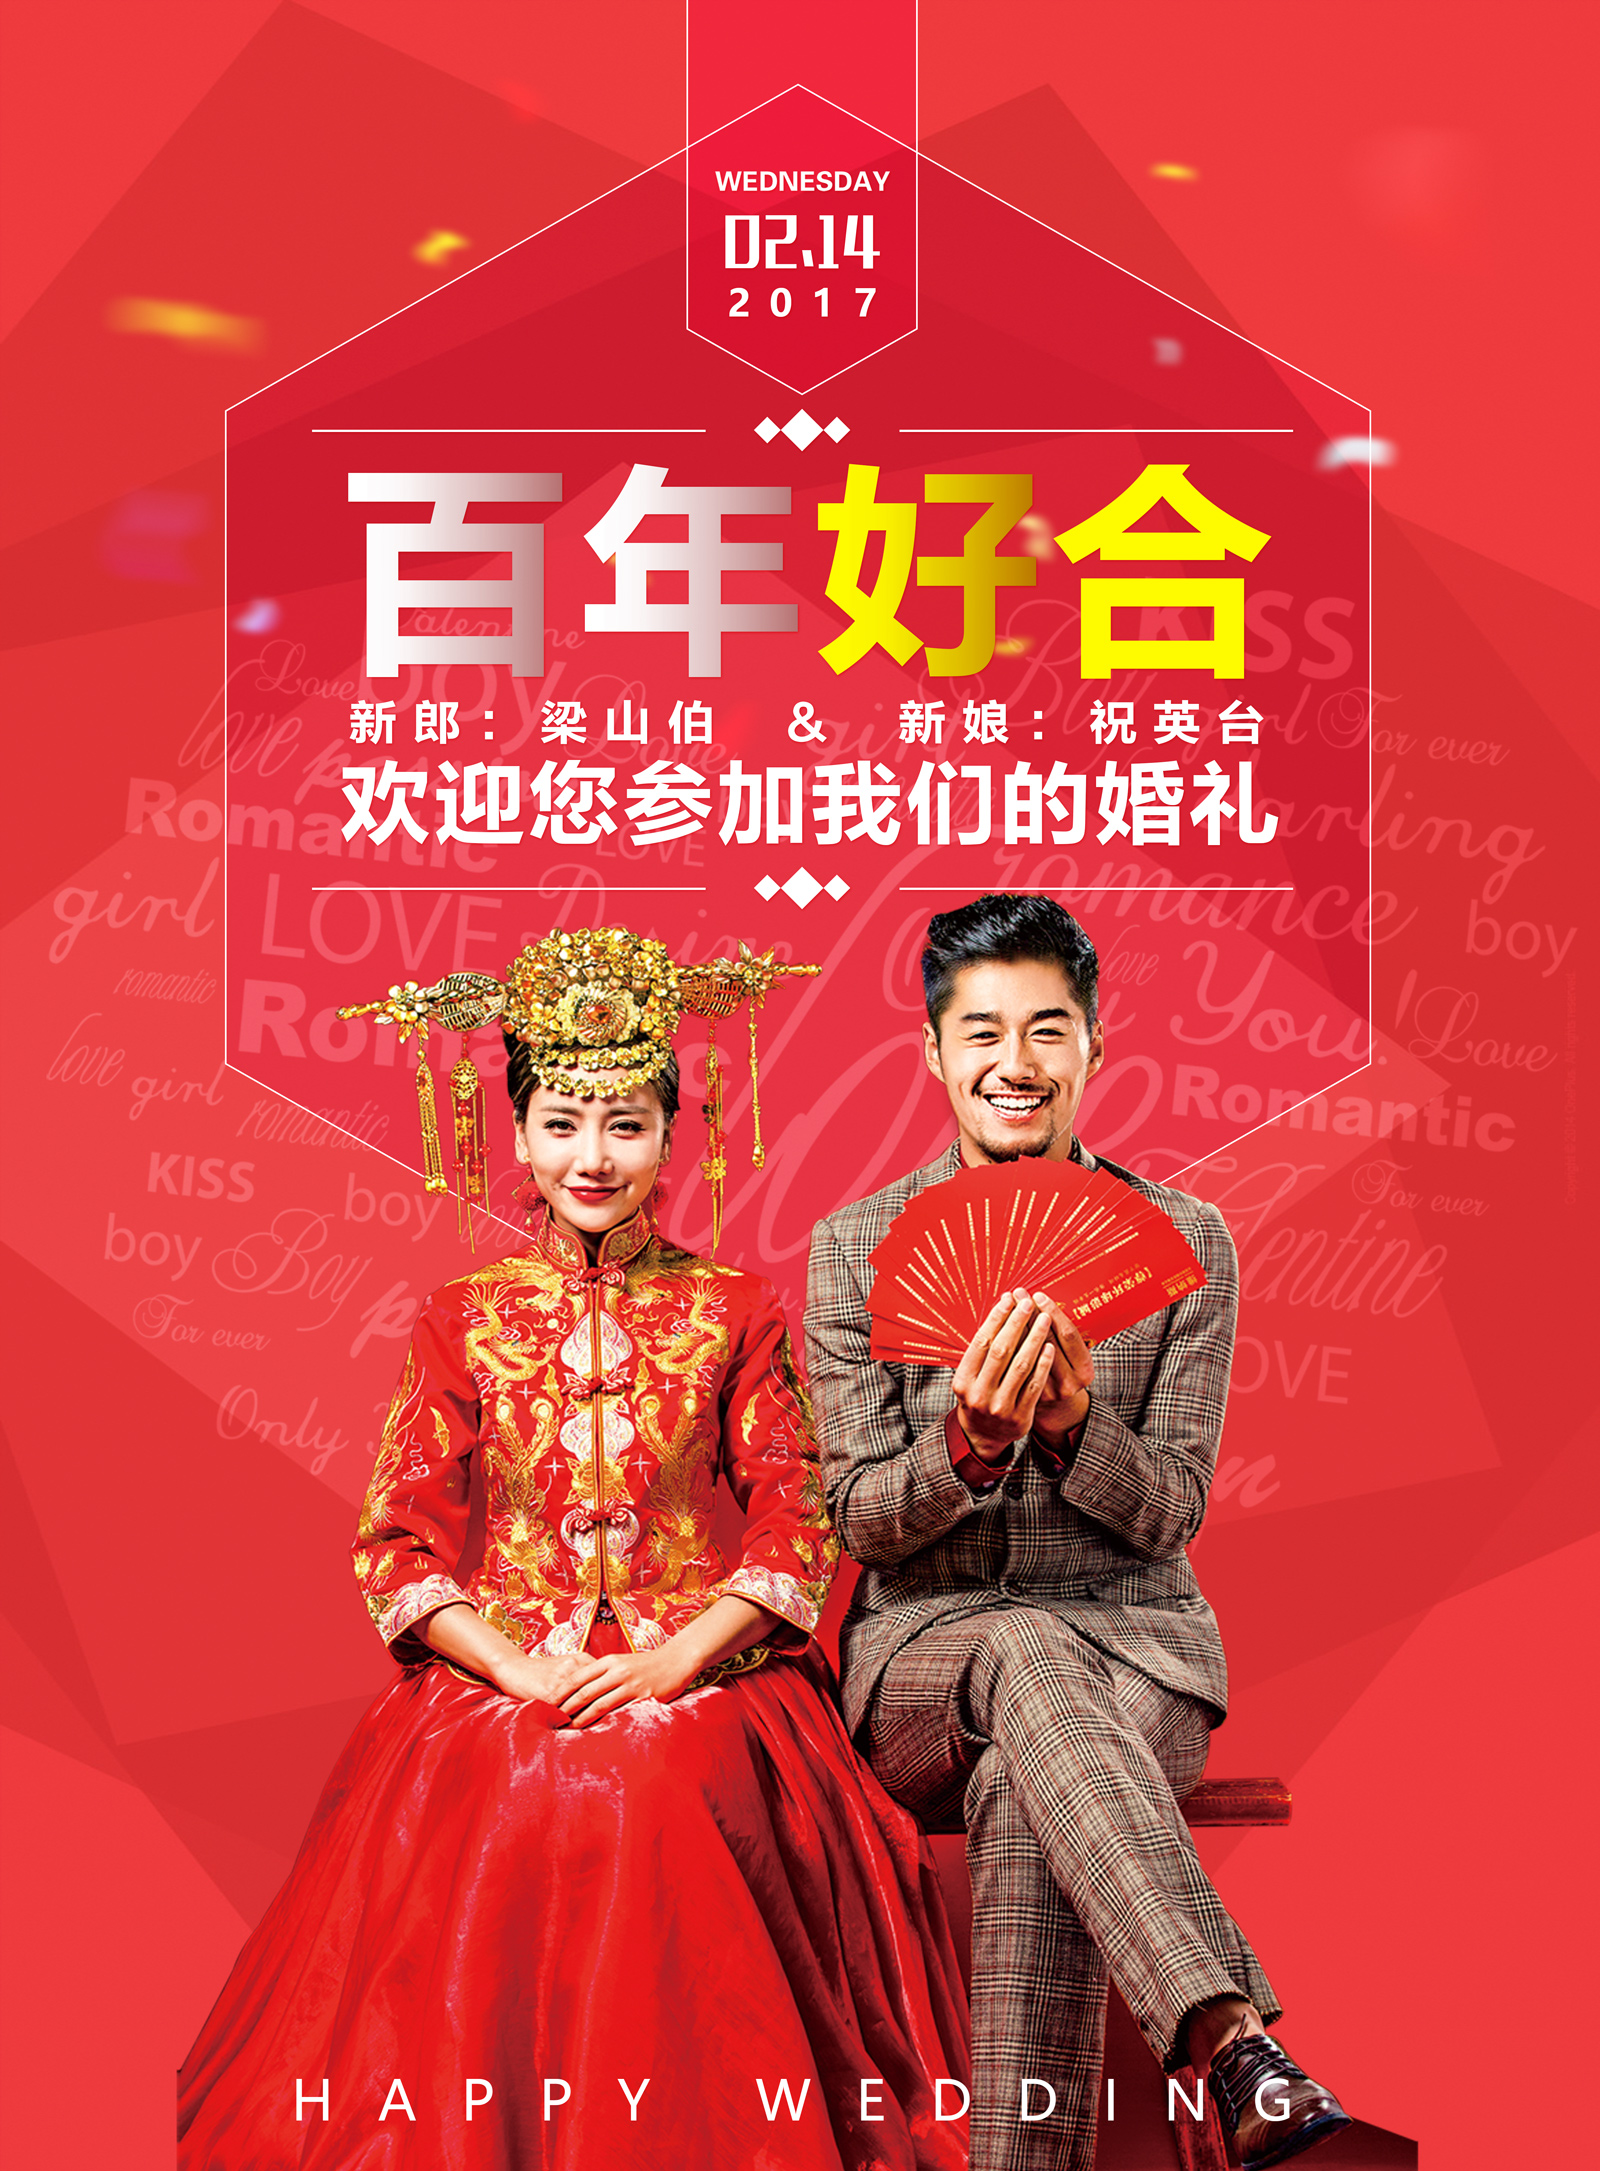 Chinese style wedding ,wedding invitation design PSD File Free Download